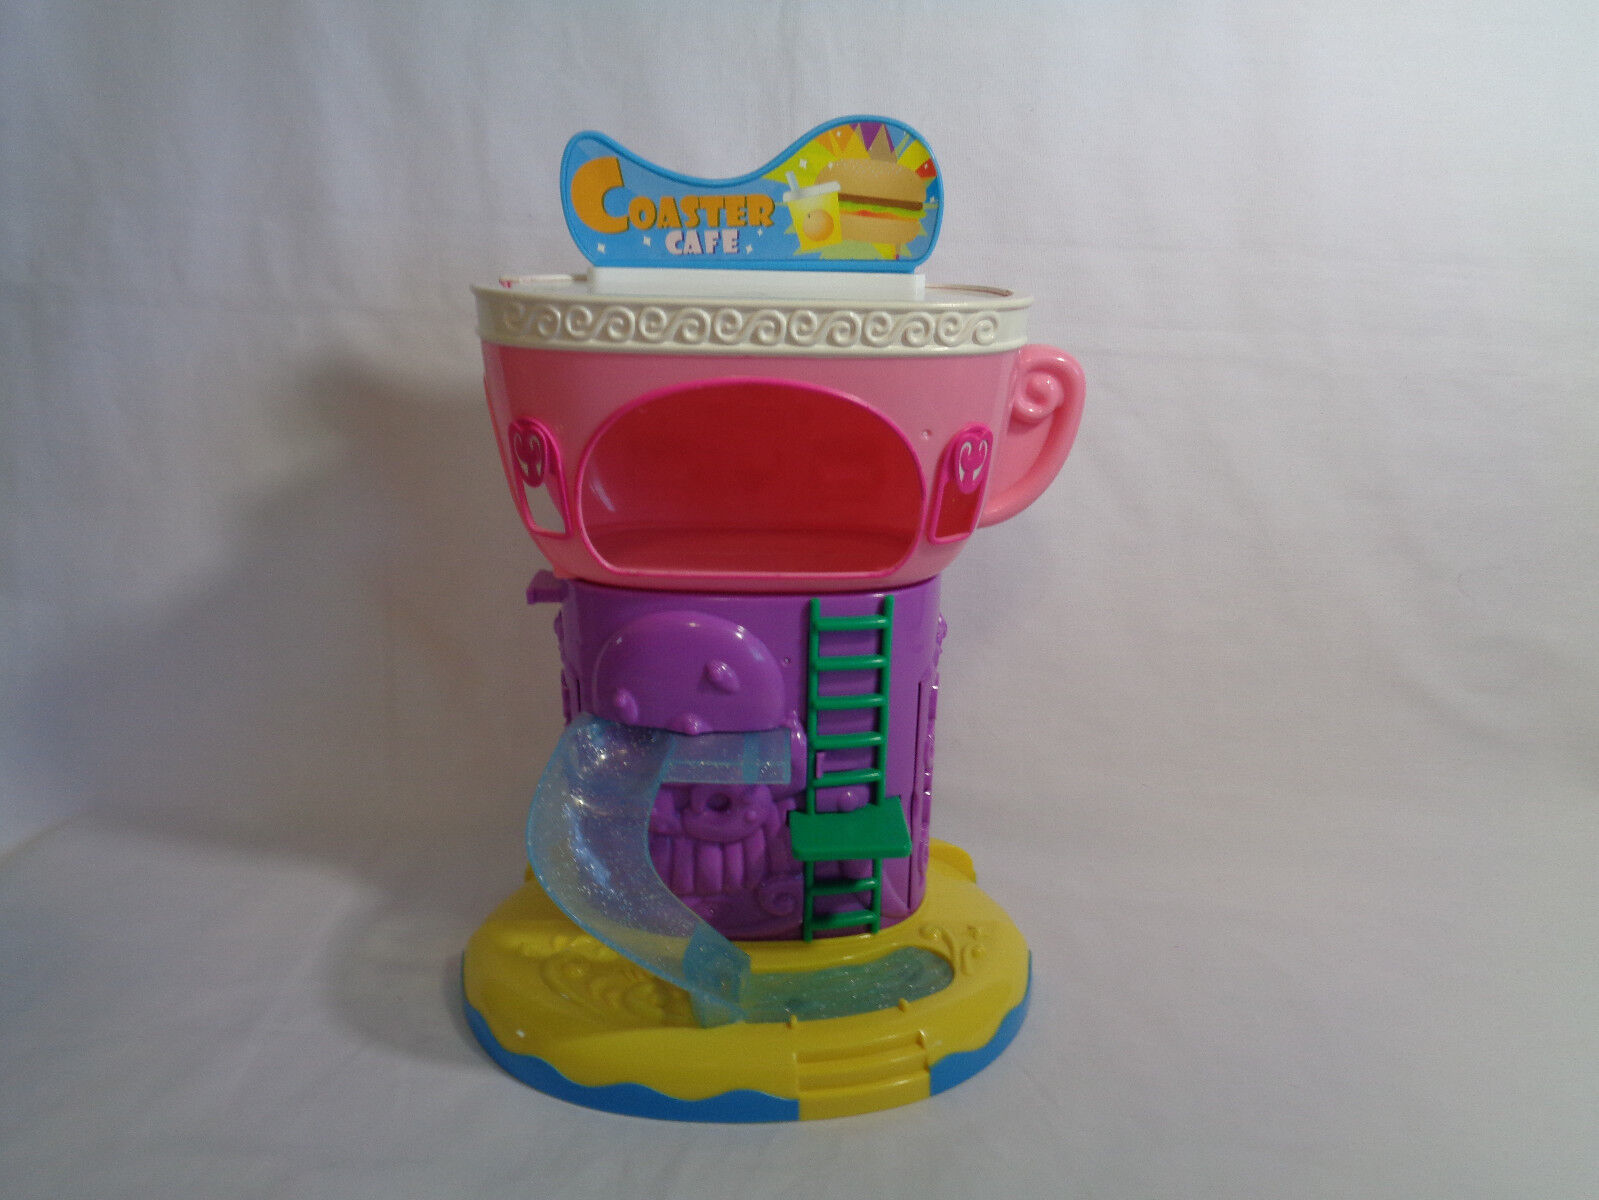 Squinkies Coaster Cafe Replacement Play Set - as is - $6.47